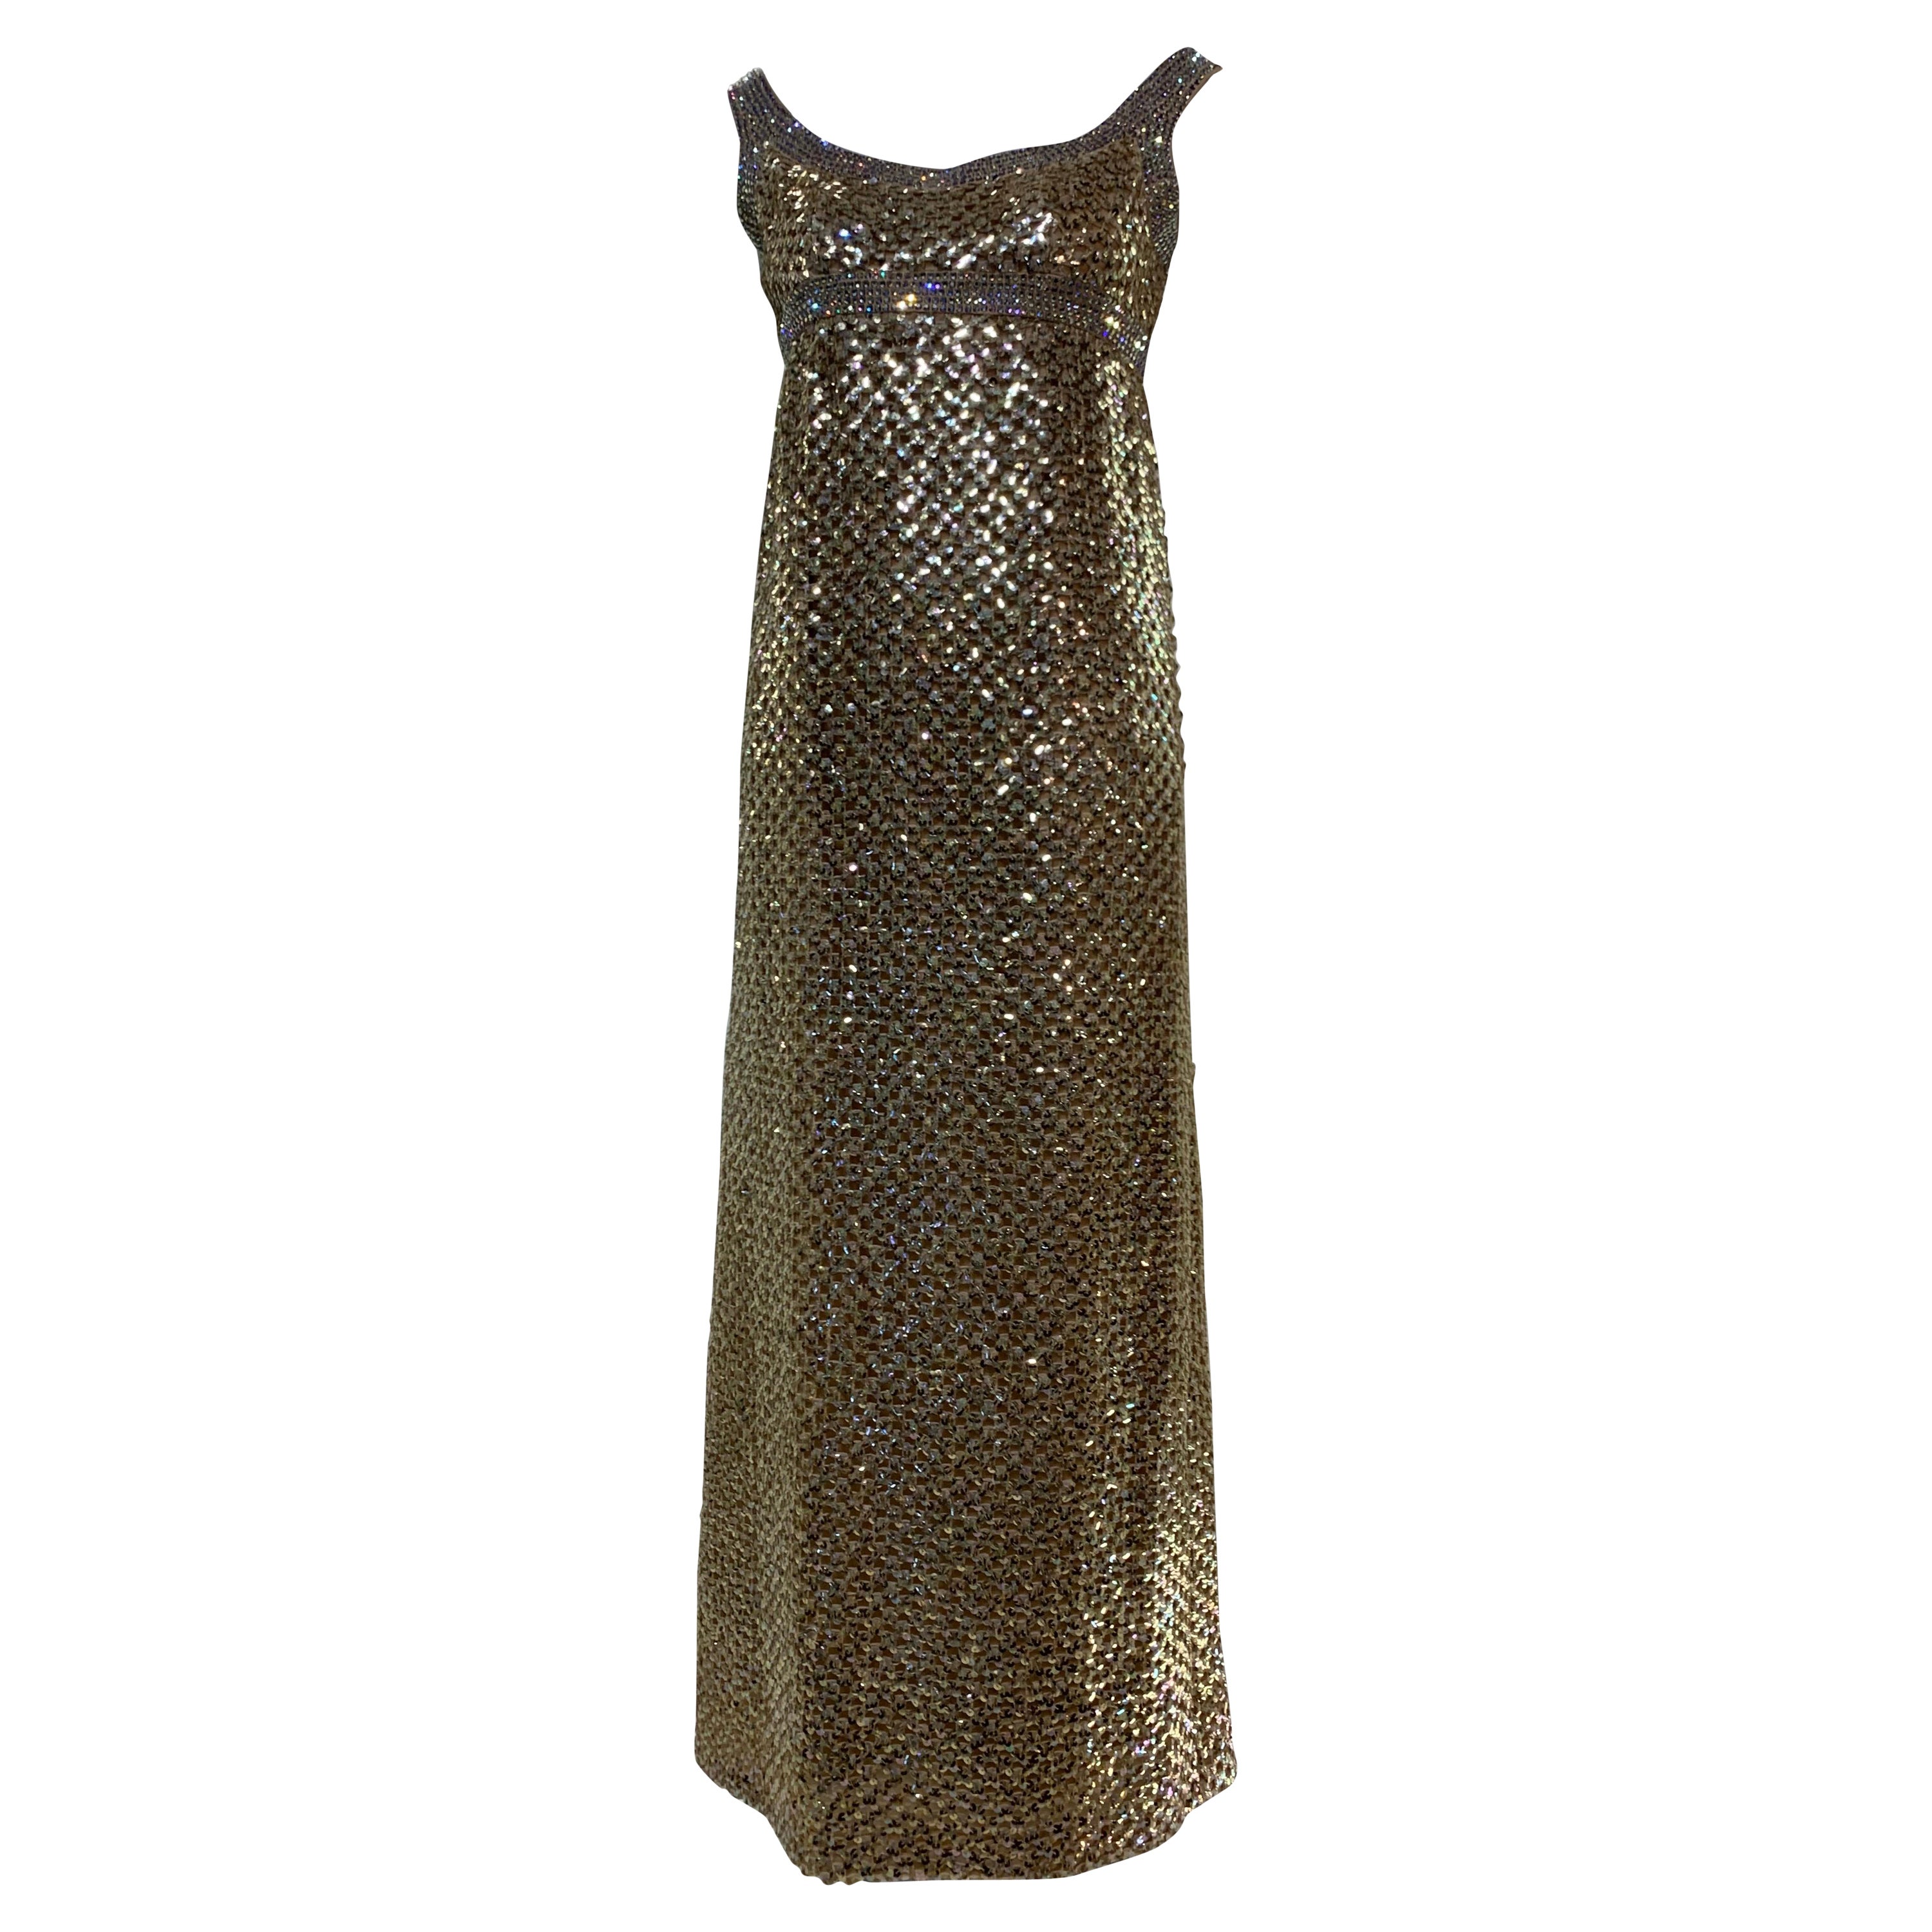 1960s Mod Empire Waist Gown in Gold Sequin Lattice and Iridescent Rhinestones For Sale